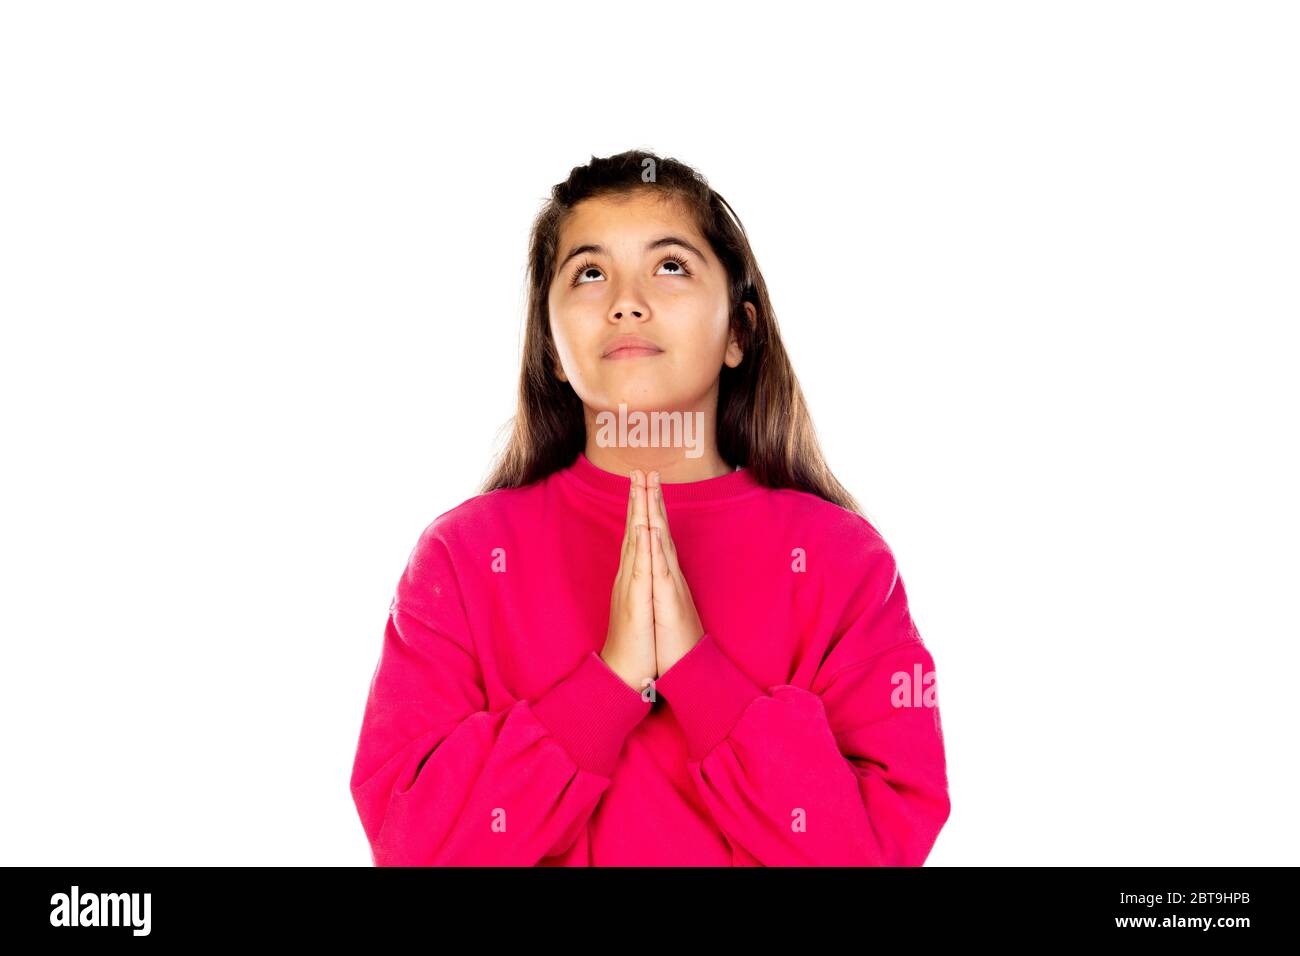 Adorable preteen girl with pink jersey isolated on a white background Stock Photo